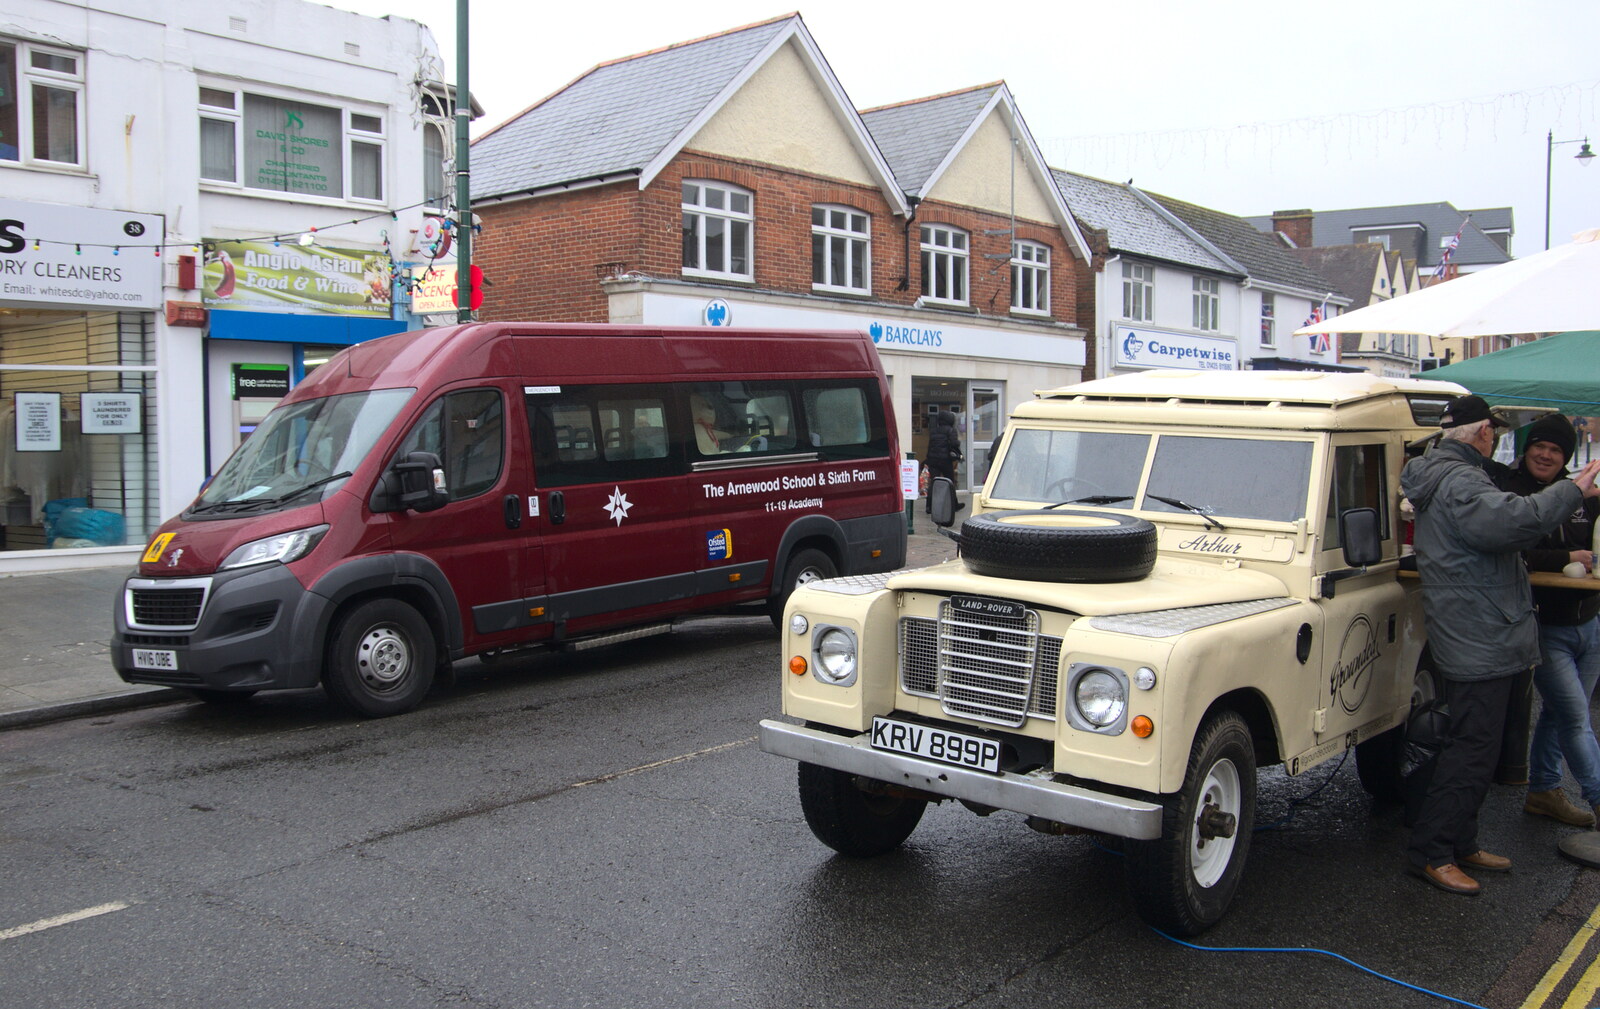 An Arnewood minibus, and a vintage Land Rover from A Christmas Market, New Milton, Hampshire - 24th November 2018